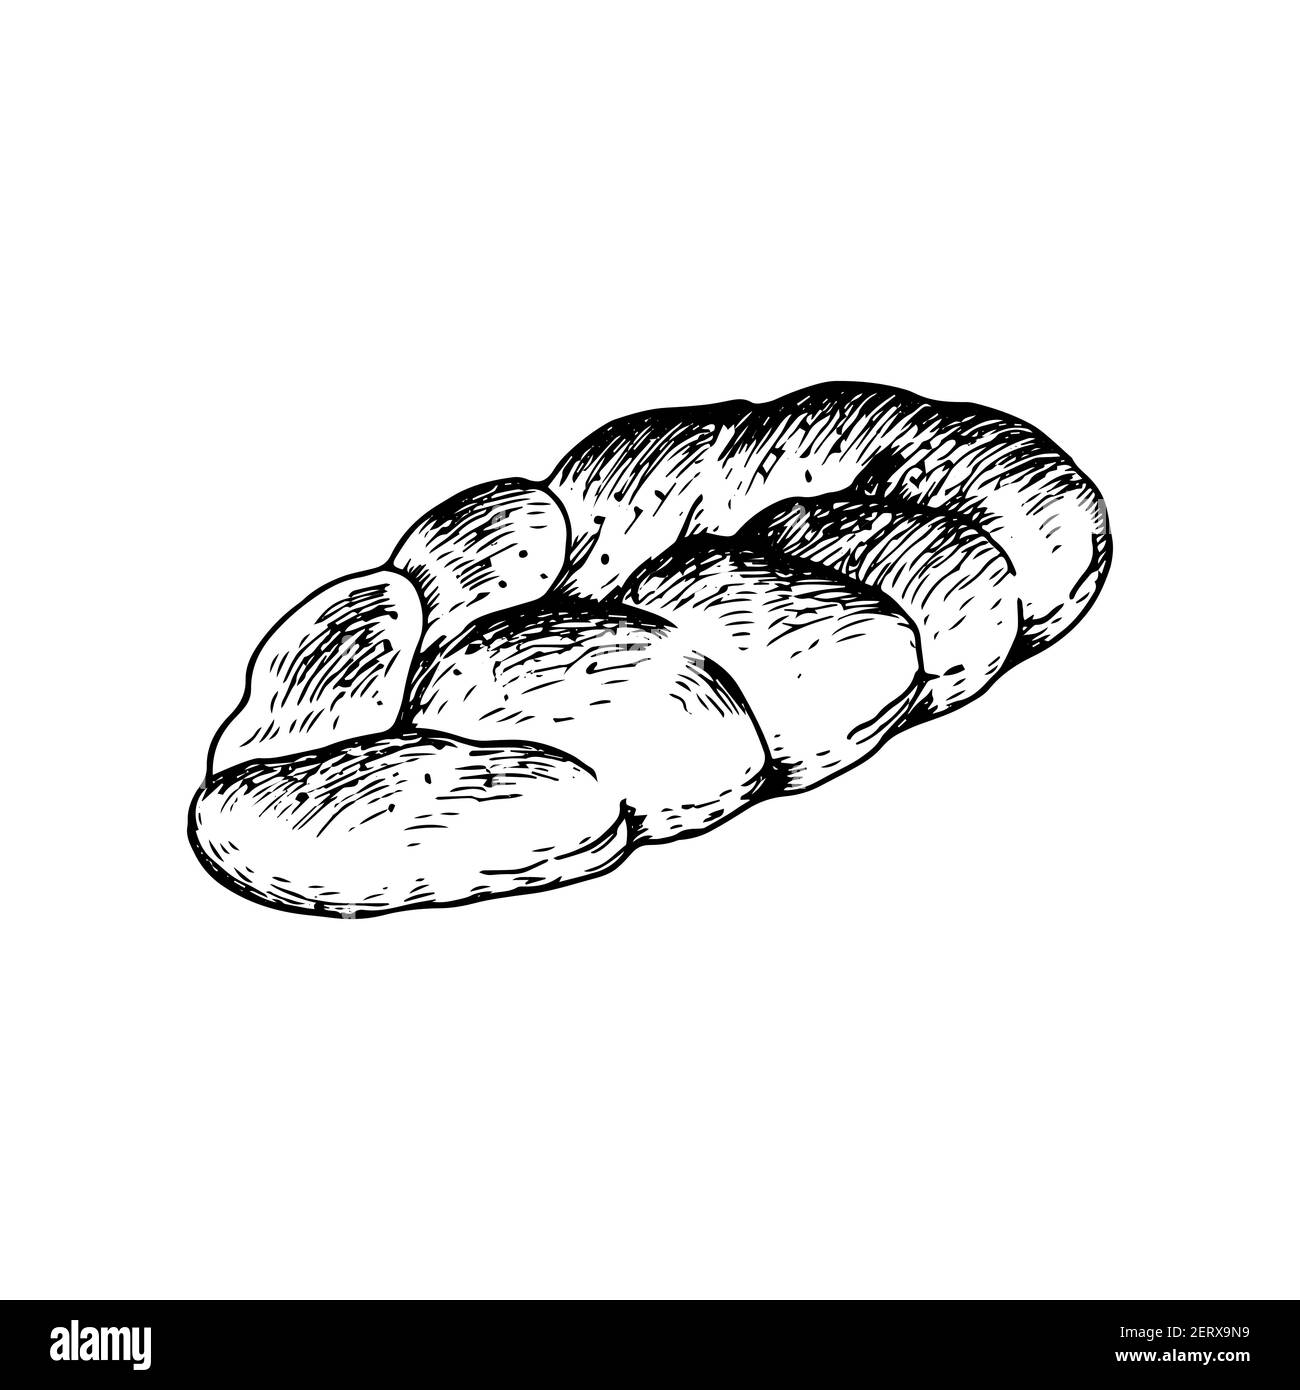 Delicious buttery wicker bun with crispy crust sprinkled with sesame seeds and poppy seeds.Vector illustration, black and white sketch, isolated line Stock Vector